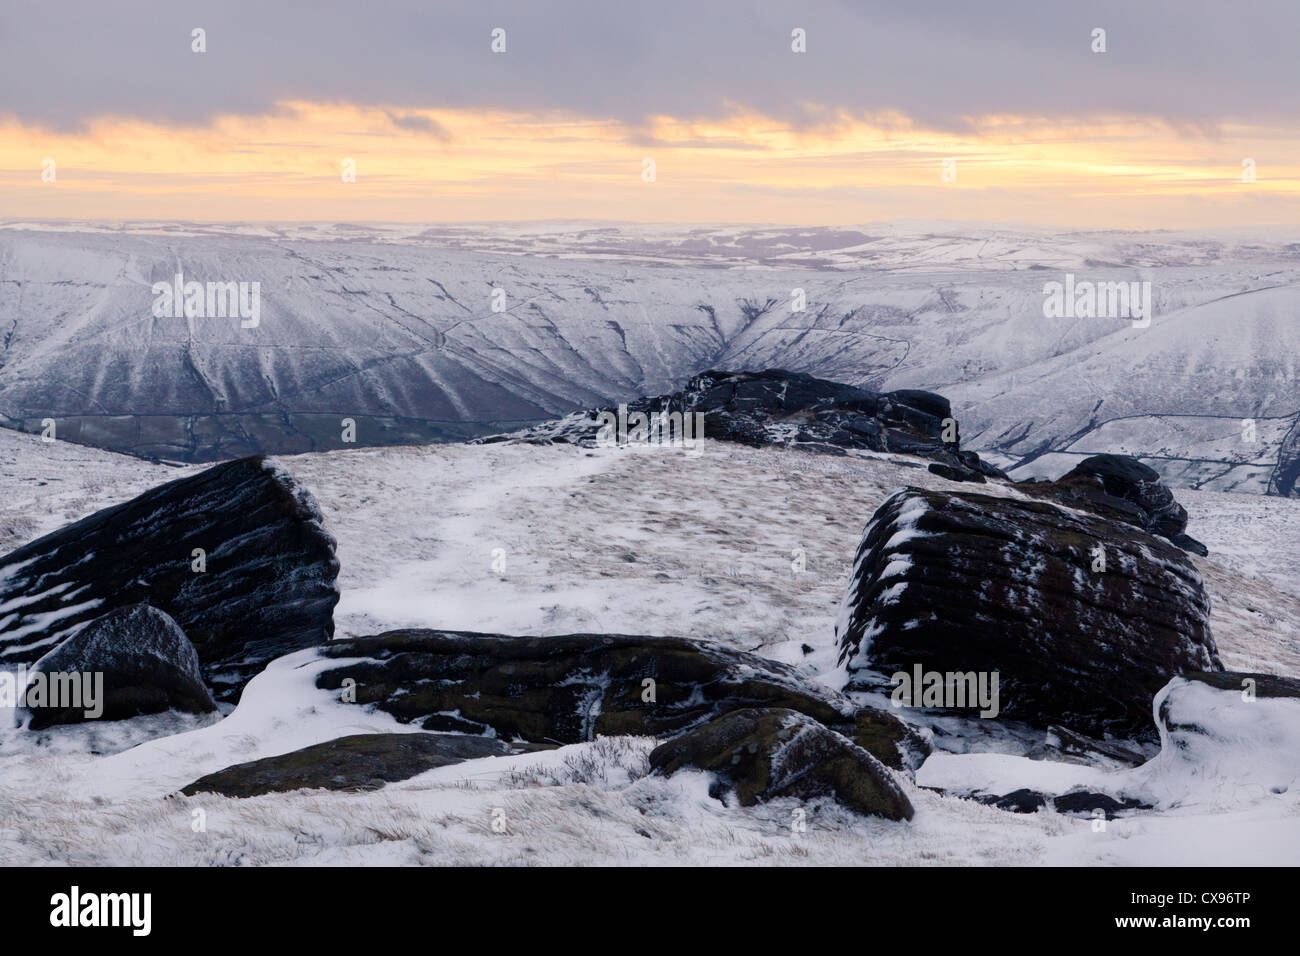 A snow scene at sunset. A Winter landscape view over the Vale of Edale from Kinder Scout, Derbyshire, Peak District National Park, England, UK Stock Photo